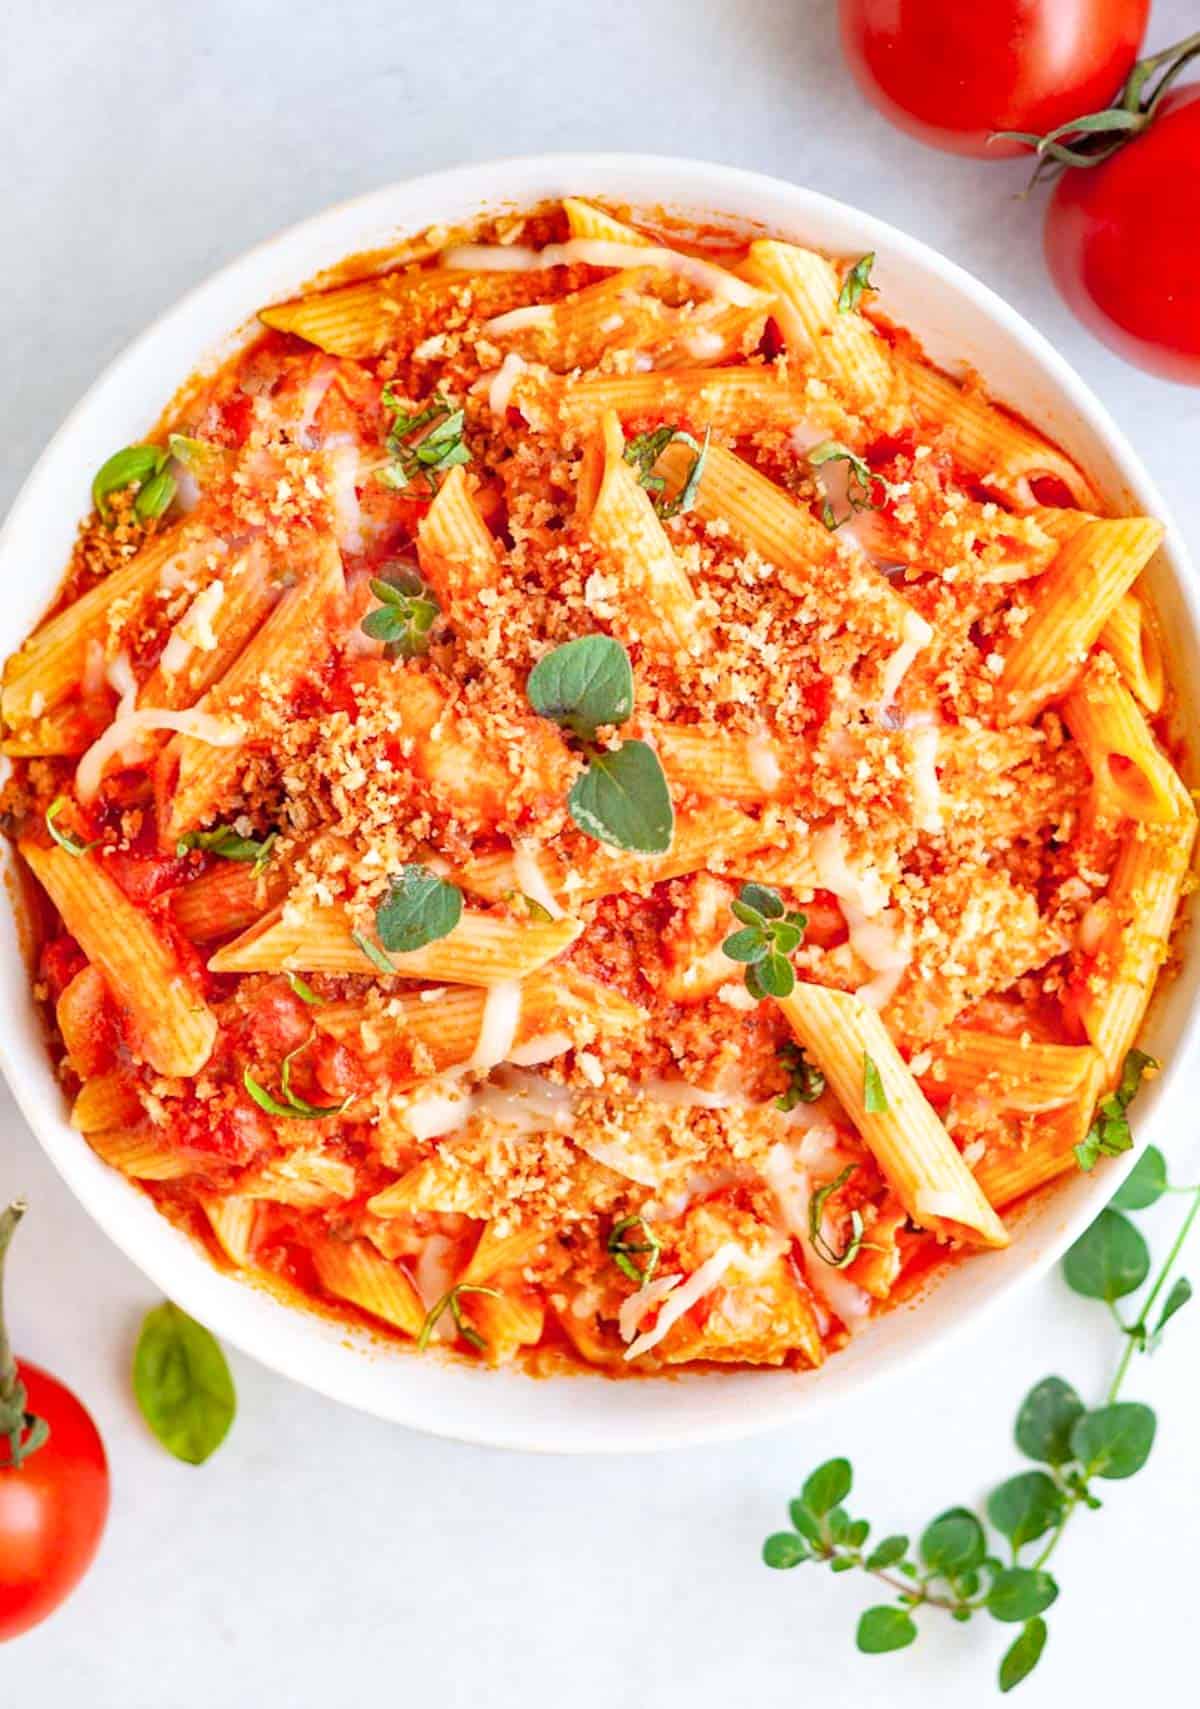 A bowl of penne pasta with red sauce and melted cheese.